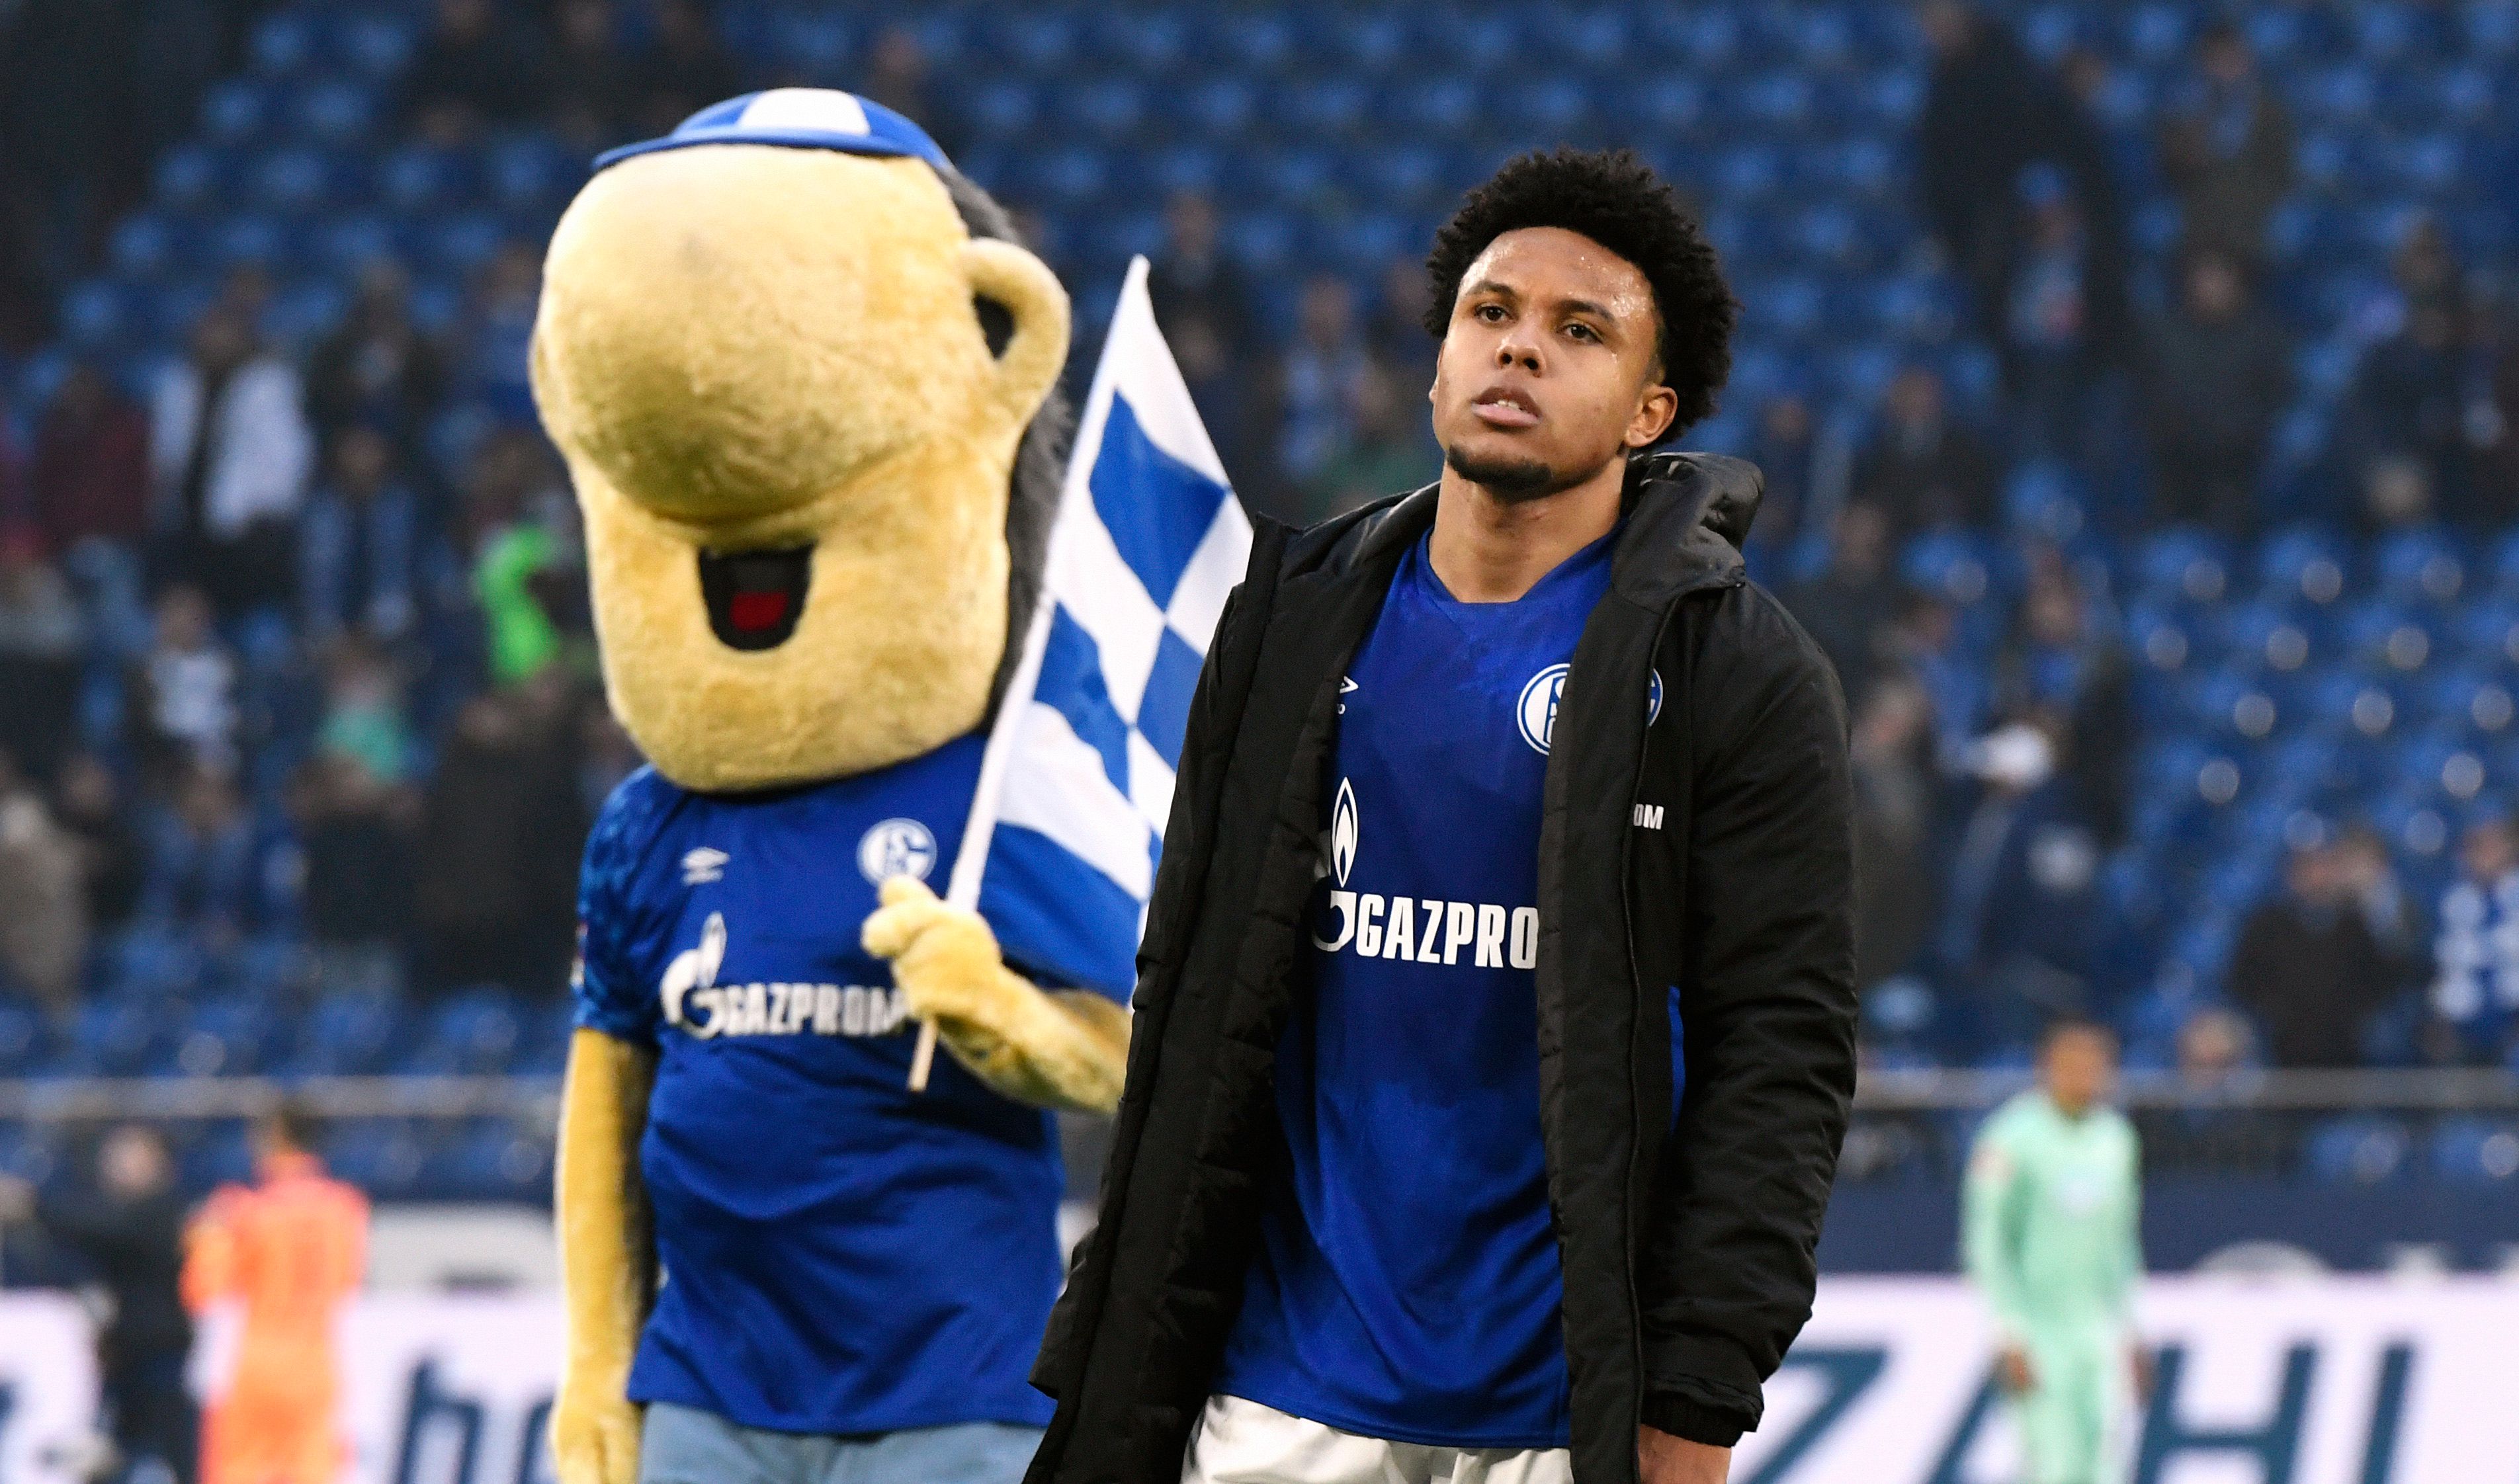 Schalke's US midfielder Weston McKennie reacts after the German first division Bundesliga football match FC Schalke 04 vs 1899 Hoffenheim in Gelsenkirchen, western Germany, on March 7, 2020. (Photo by UWE KRAFT / AFP) / DFL REGULATIONS PROHIBIT ANY USE OF PHOTOGRAPHS AS IMAGE SEQUENCES AND/OR QUASI-VIDEO